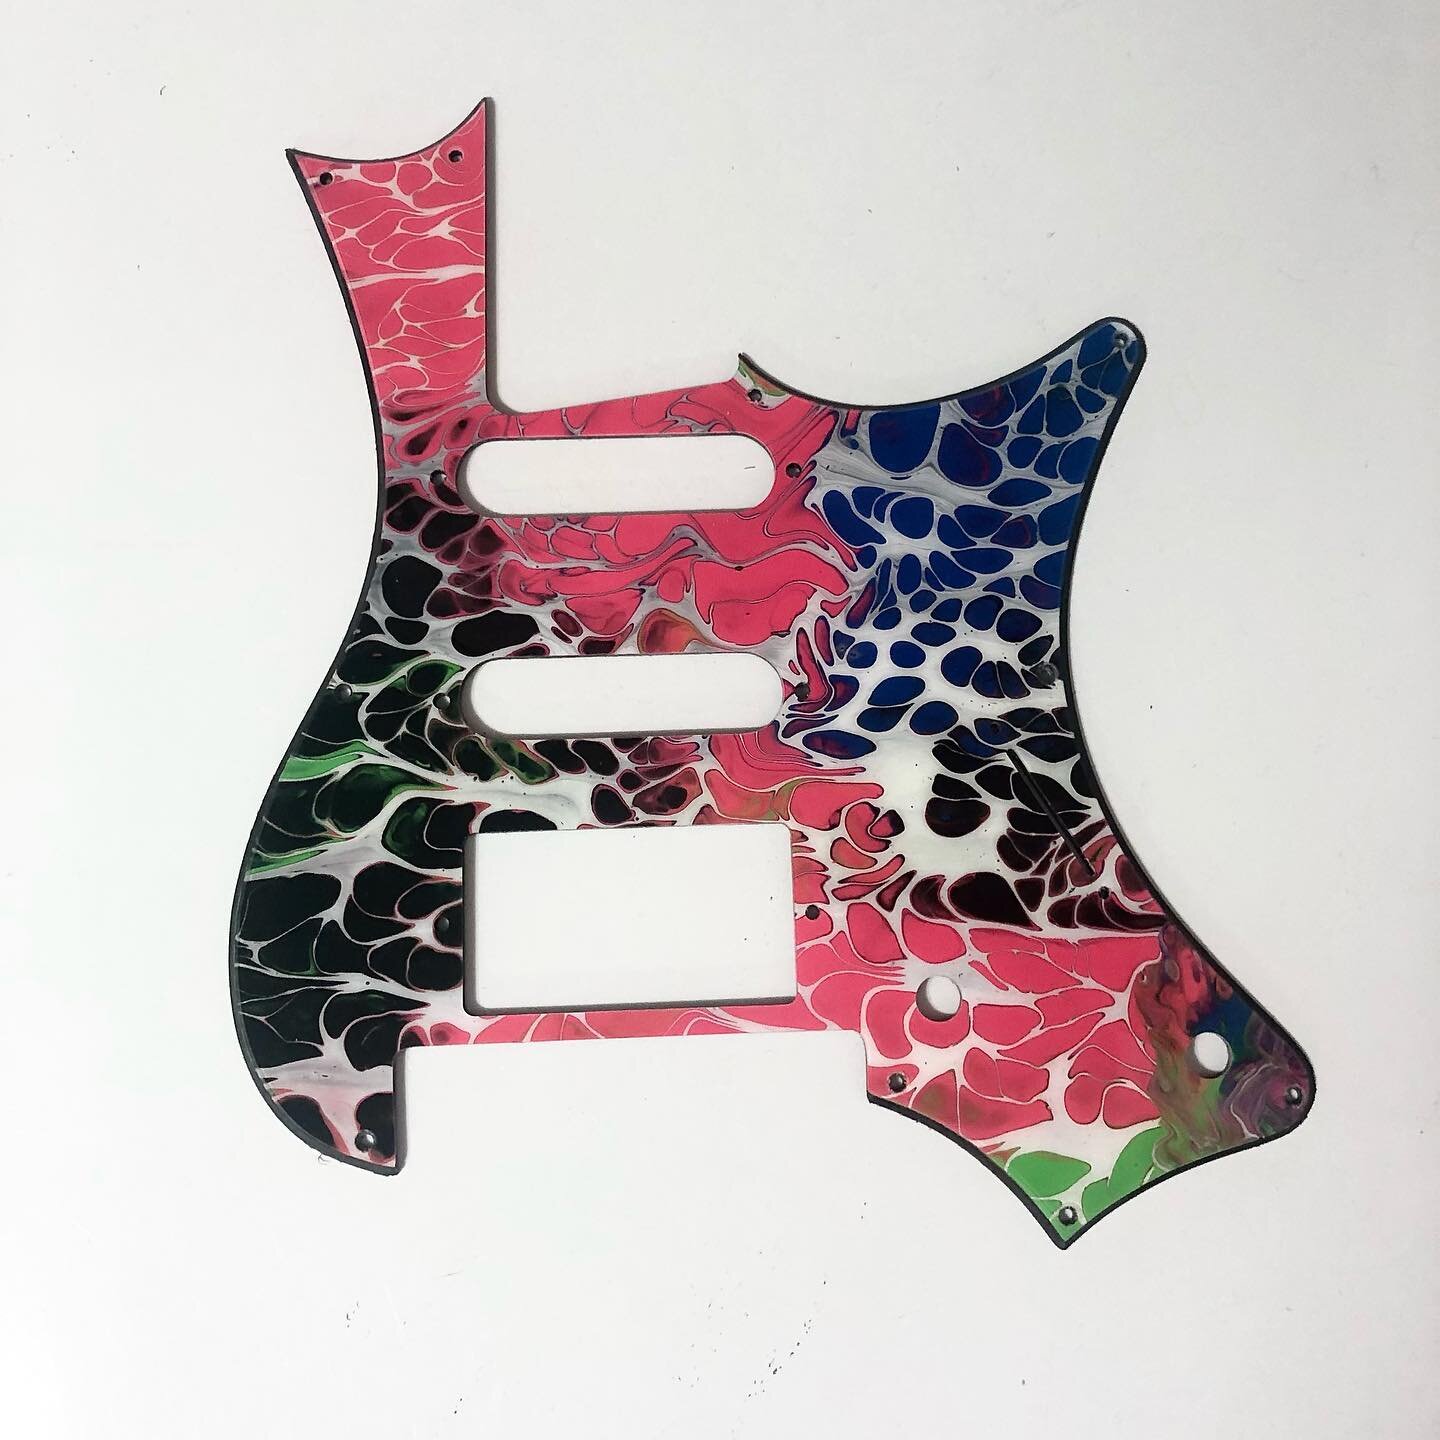 Fresh off the presses. Neon Rain - a Strandberg Classic 6 pickguard. Get it while you can. There&rsquo;s only 1. #nectarmusik #goheadless #strandbergguitars #classic6 #boden